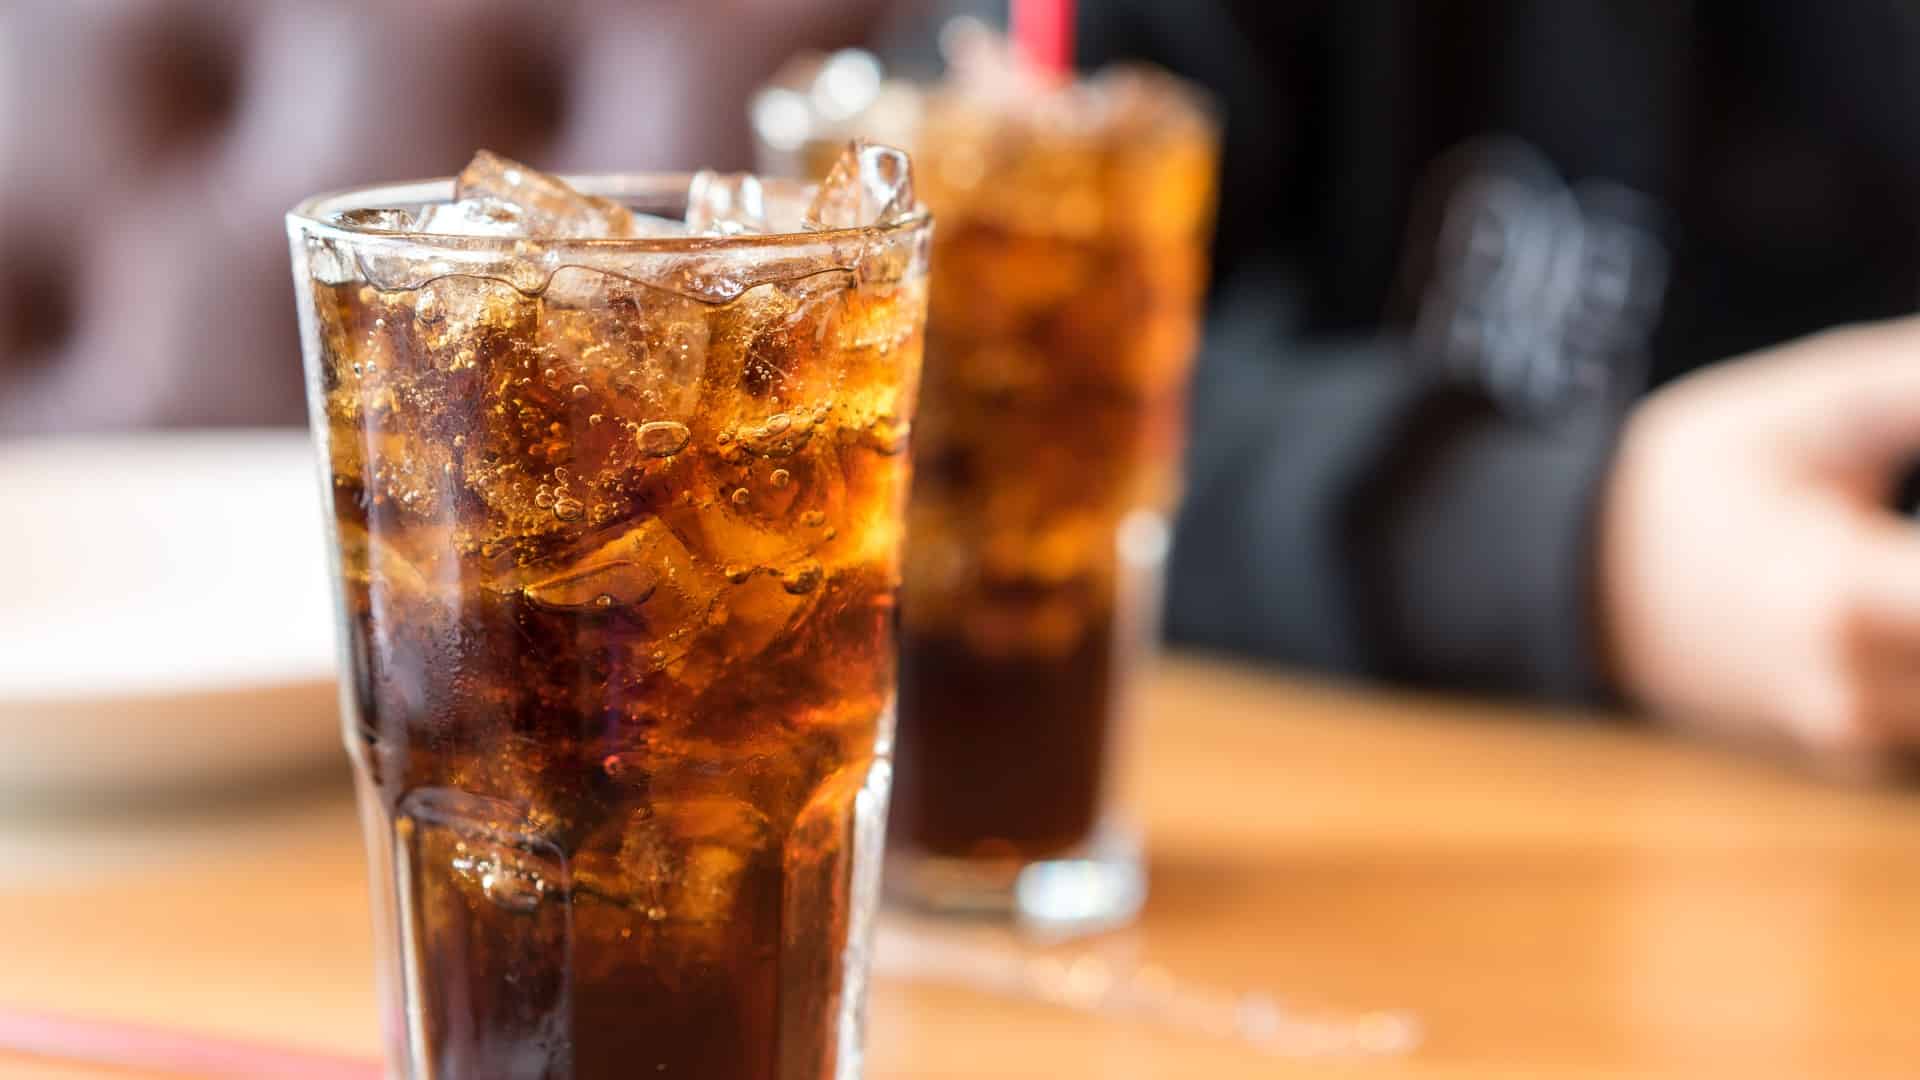 <p>Fizzy sodas are loaded with caffeine, sugar and carbonation which can cause digestive issues. This sounds like a whole lot of reasons to avoid sodas before bedtime. This is true even of low-calorie sodas as those often have fake sugars that can be just as bad. </p>